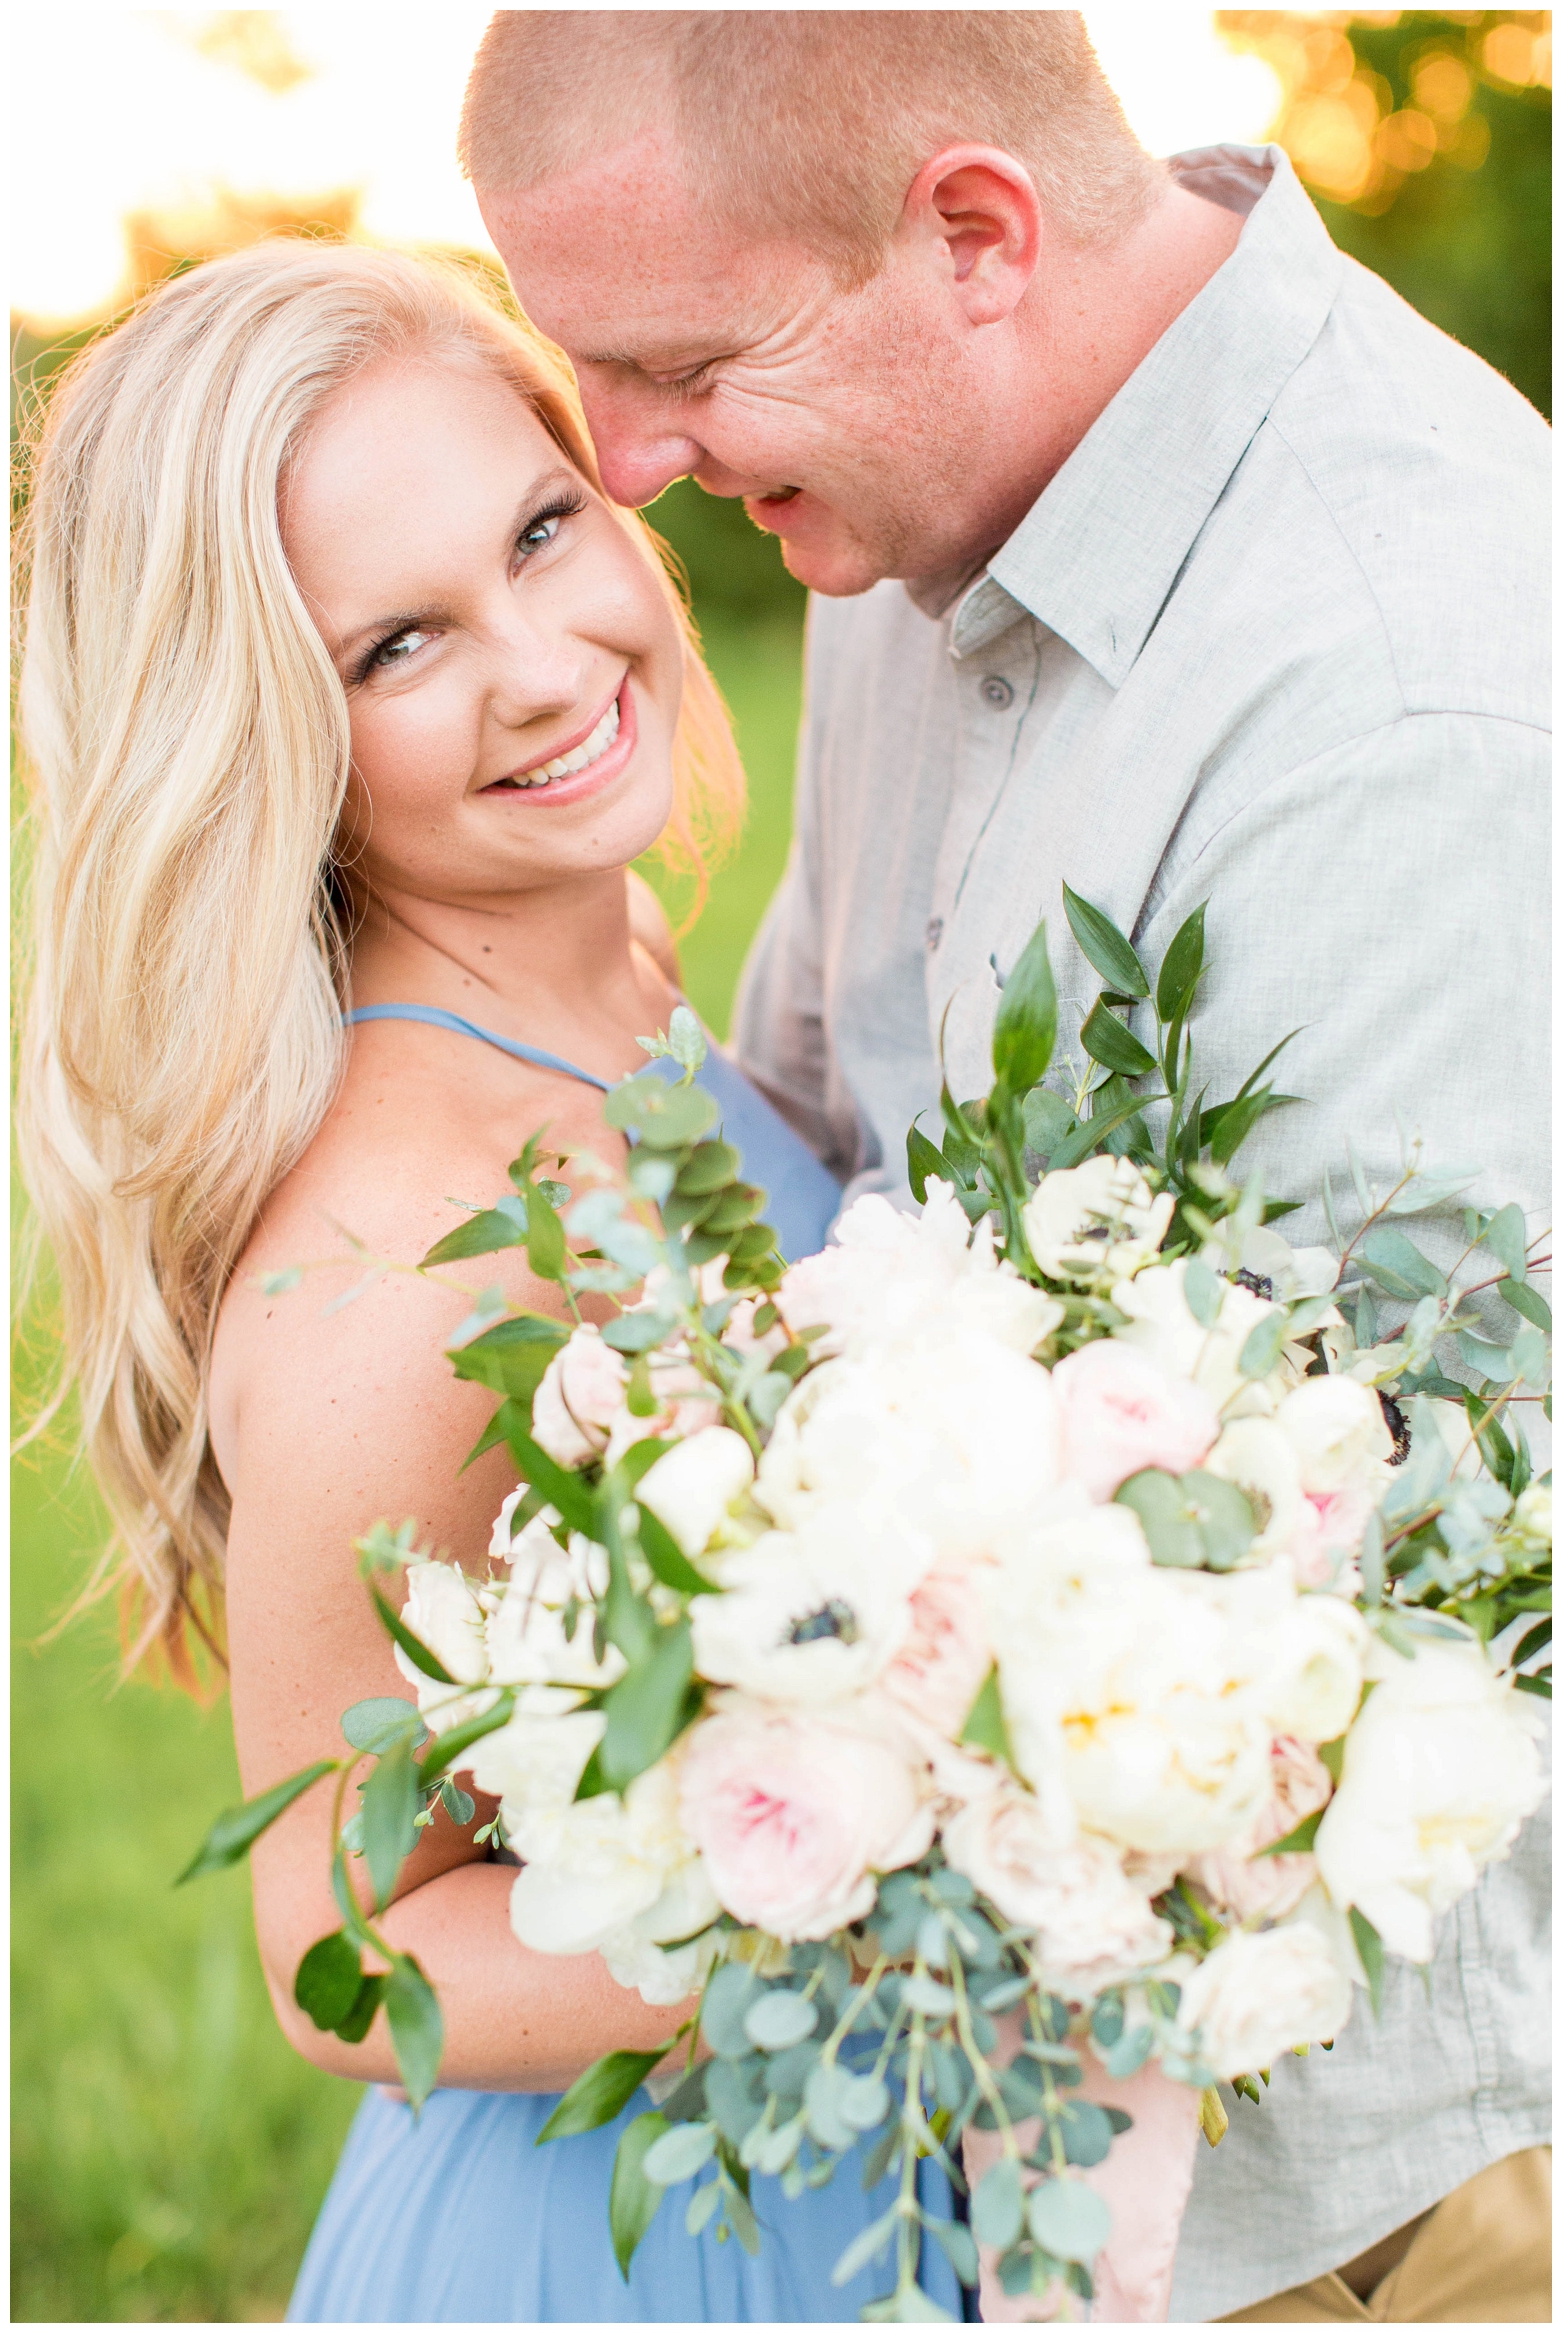 View More: http://hopetaylorphotographyphotos.pass.us/shelby-and-eric-anniversary